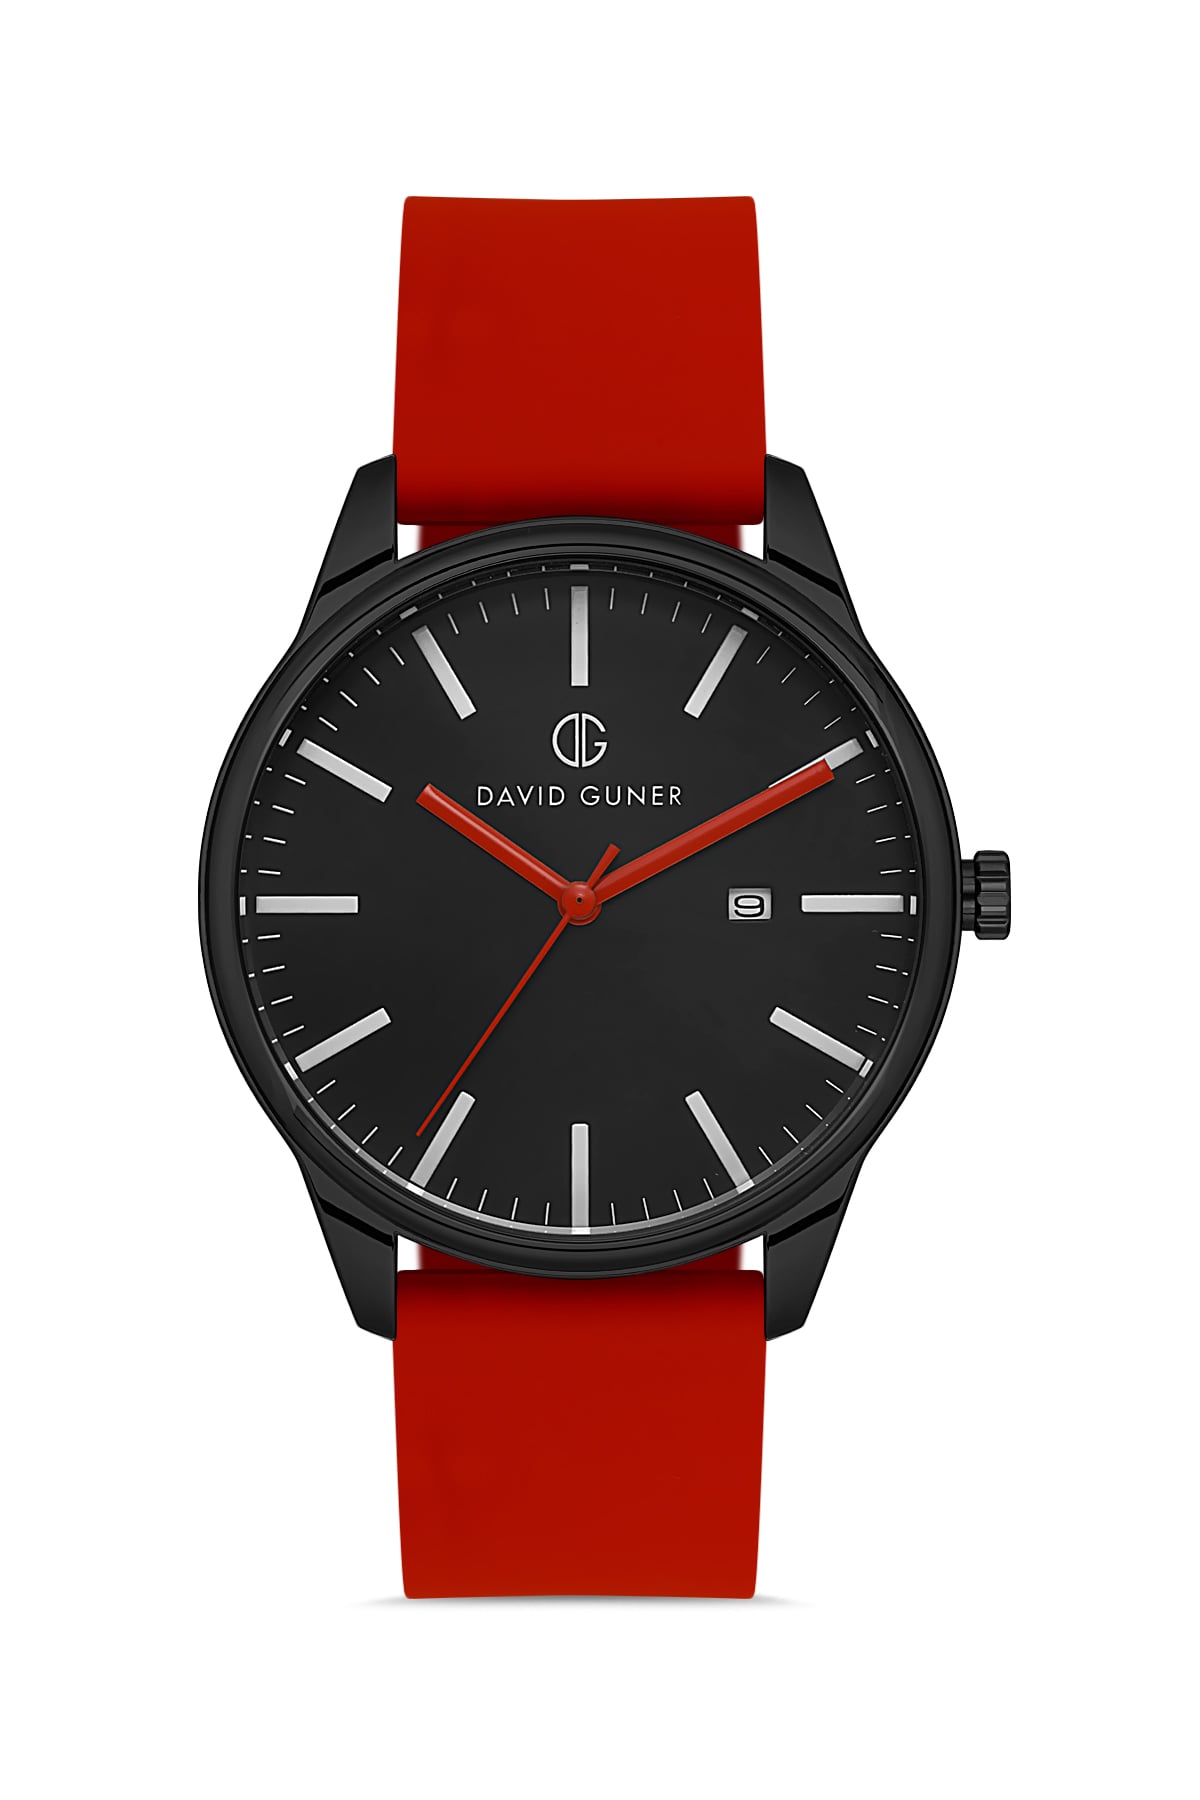 DAVID GUNER Men's Wristwatch with Black Dial and Red Silicone Strap Calendar